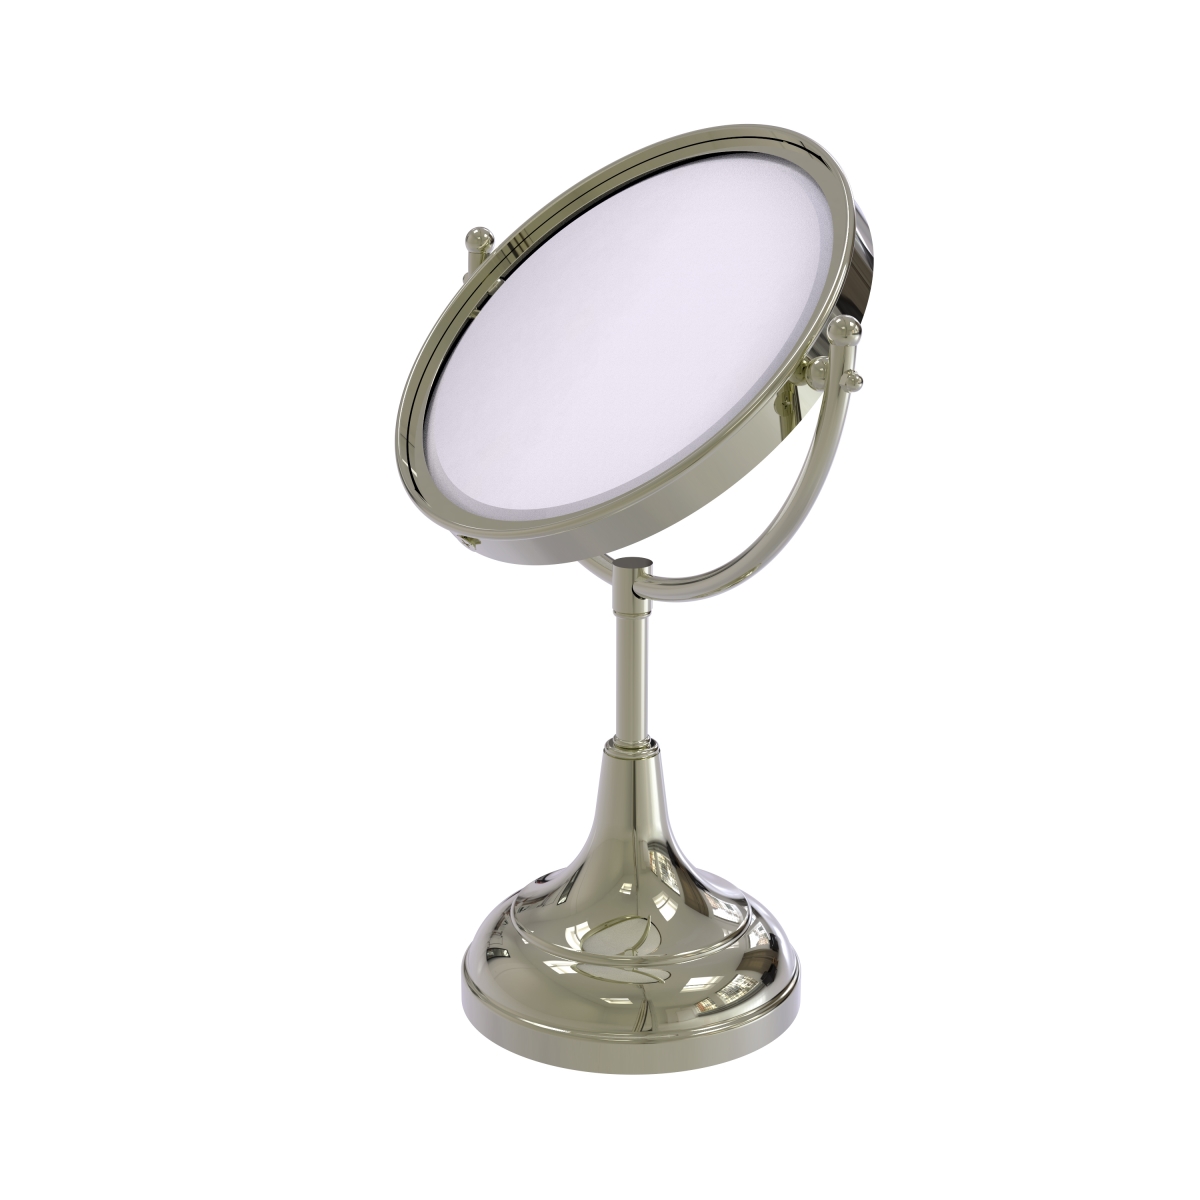 Picture of Allied Brass DM-2-2X-PNI 8 in. Vanity Top Make-Up Mirror 2X Magnification, Polished Nickel - 15 x 8 x 8 in.